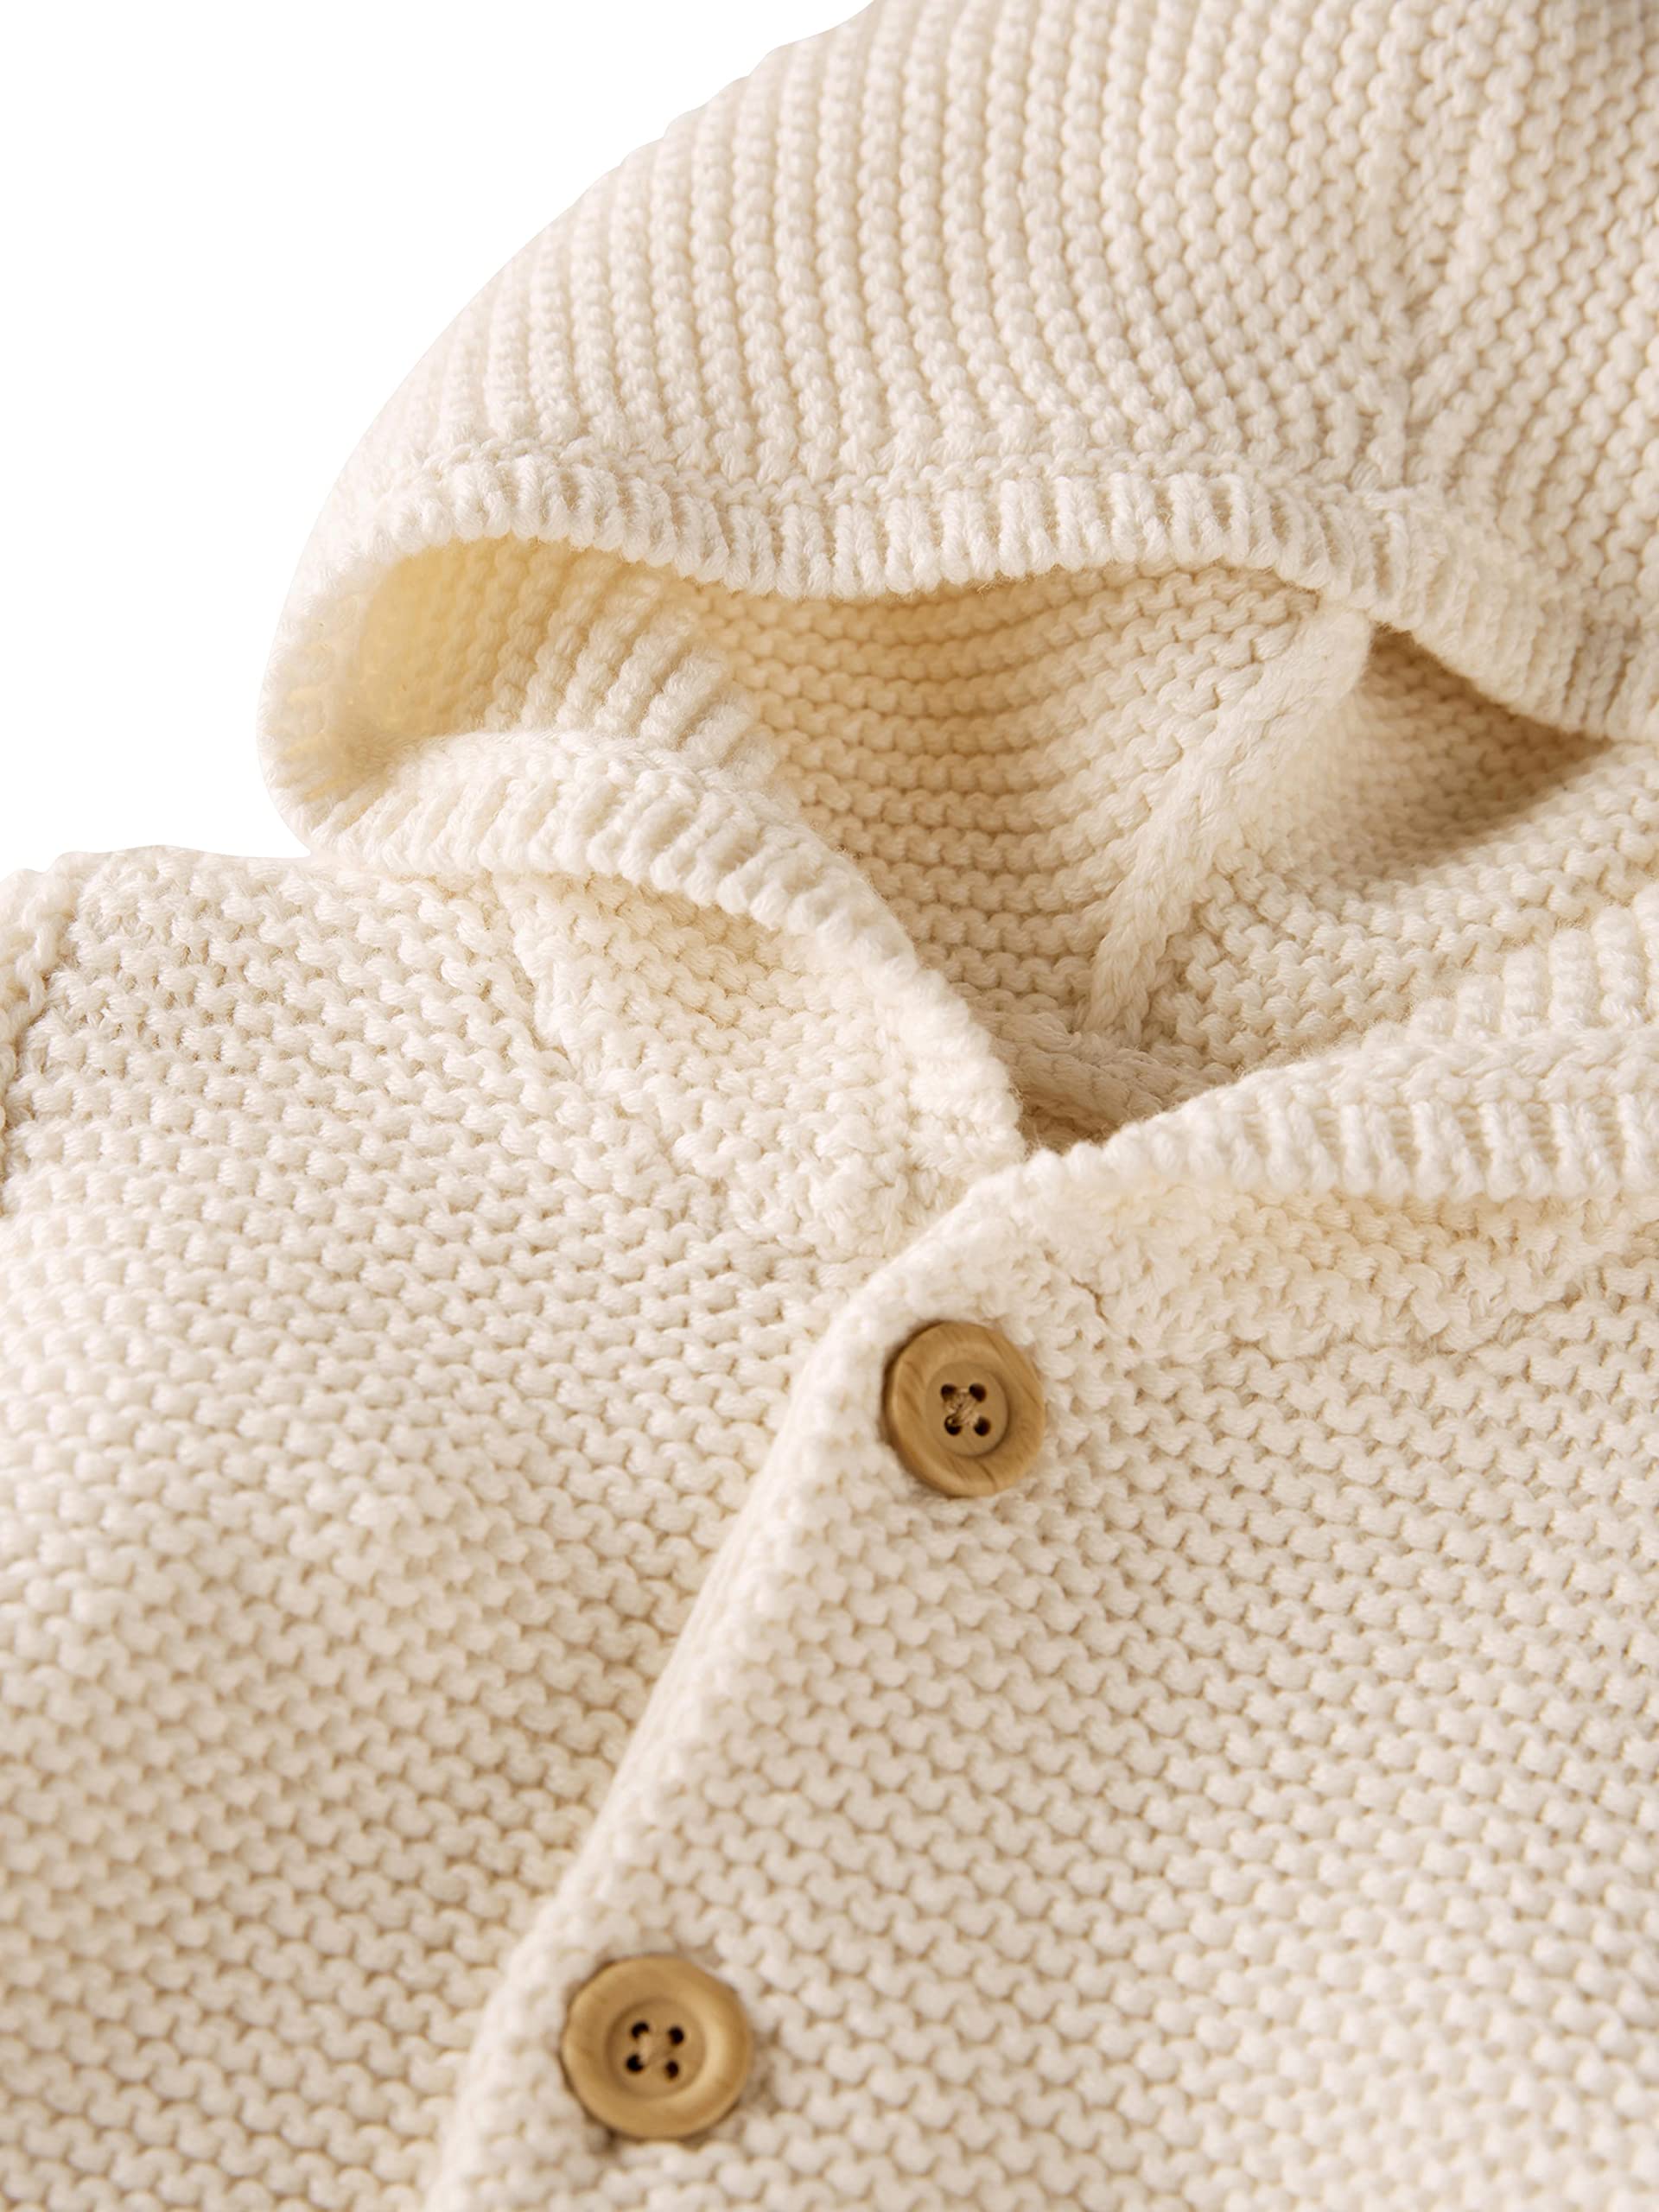 little planet by carter's Baby Organic Signature Stitch Cardigan